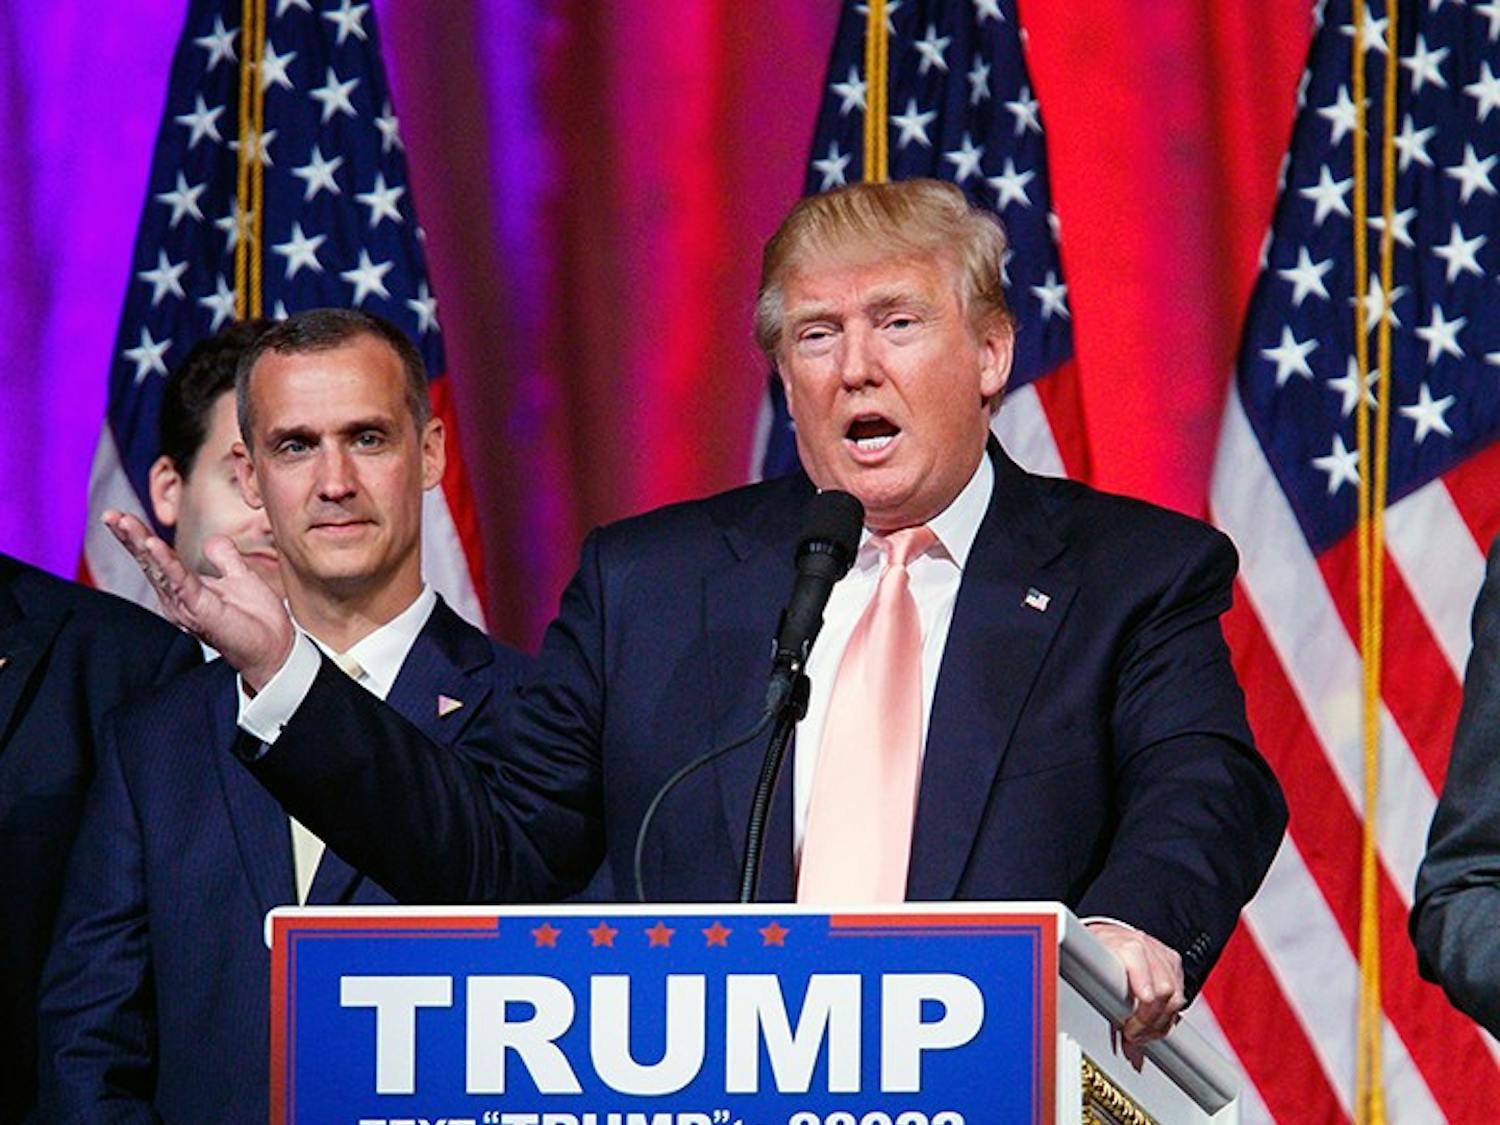 Corey Lewandowski, left, Donald Trump&apos;s campaign manager, stands beside Trump on March 15, 2016 at a campaign event in Florida. As of Monday, June 20, 2016, Lewandowski is no onger working with the campaign.  (Richard Graulich/The Palm Beach Post/Zuma Press/TNS) 